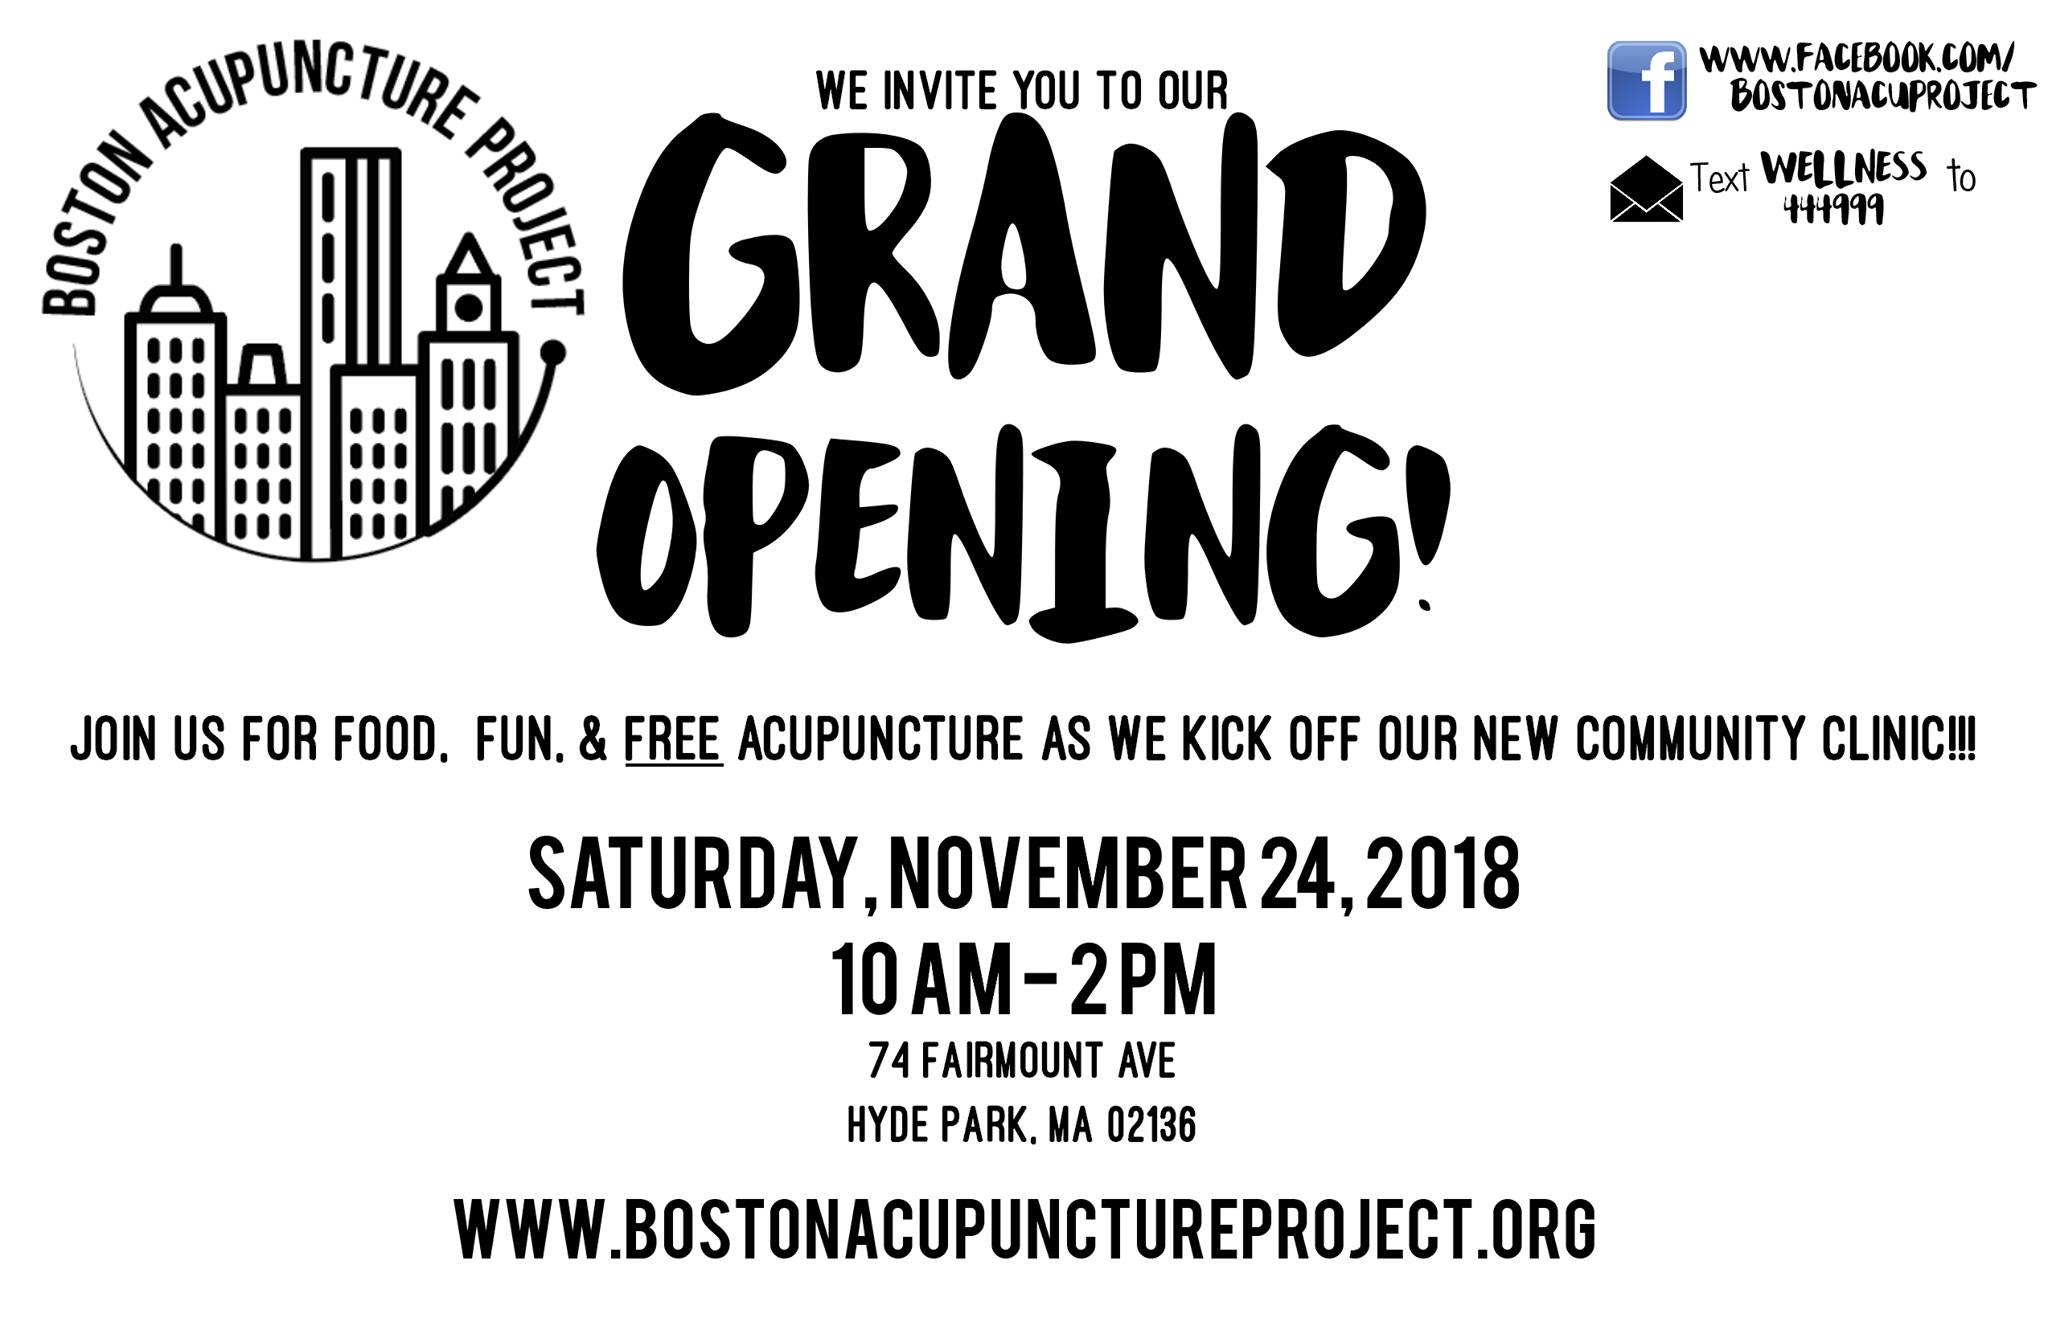 Boston Acupuncture Project - we invite you to our Grand Opening! Join us for food, fun, and FREE acupuncture as we kick off our new community clinic!!! Saturday, November 24, 2018 from 10am-2pm at 74 Fairmount Ave, Hyde Park, MA 02136. www.bostonacupunctureproject.org or facebook.com/bostonacuproject or text WELLNESS to 444999